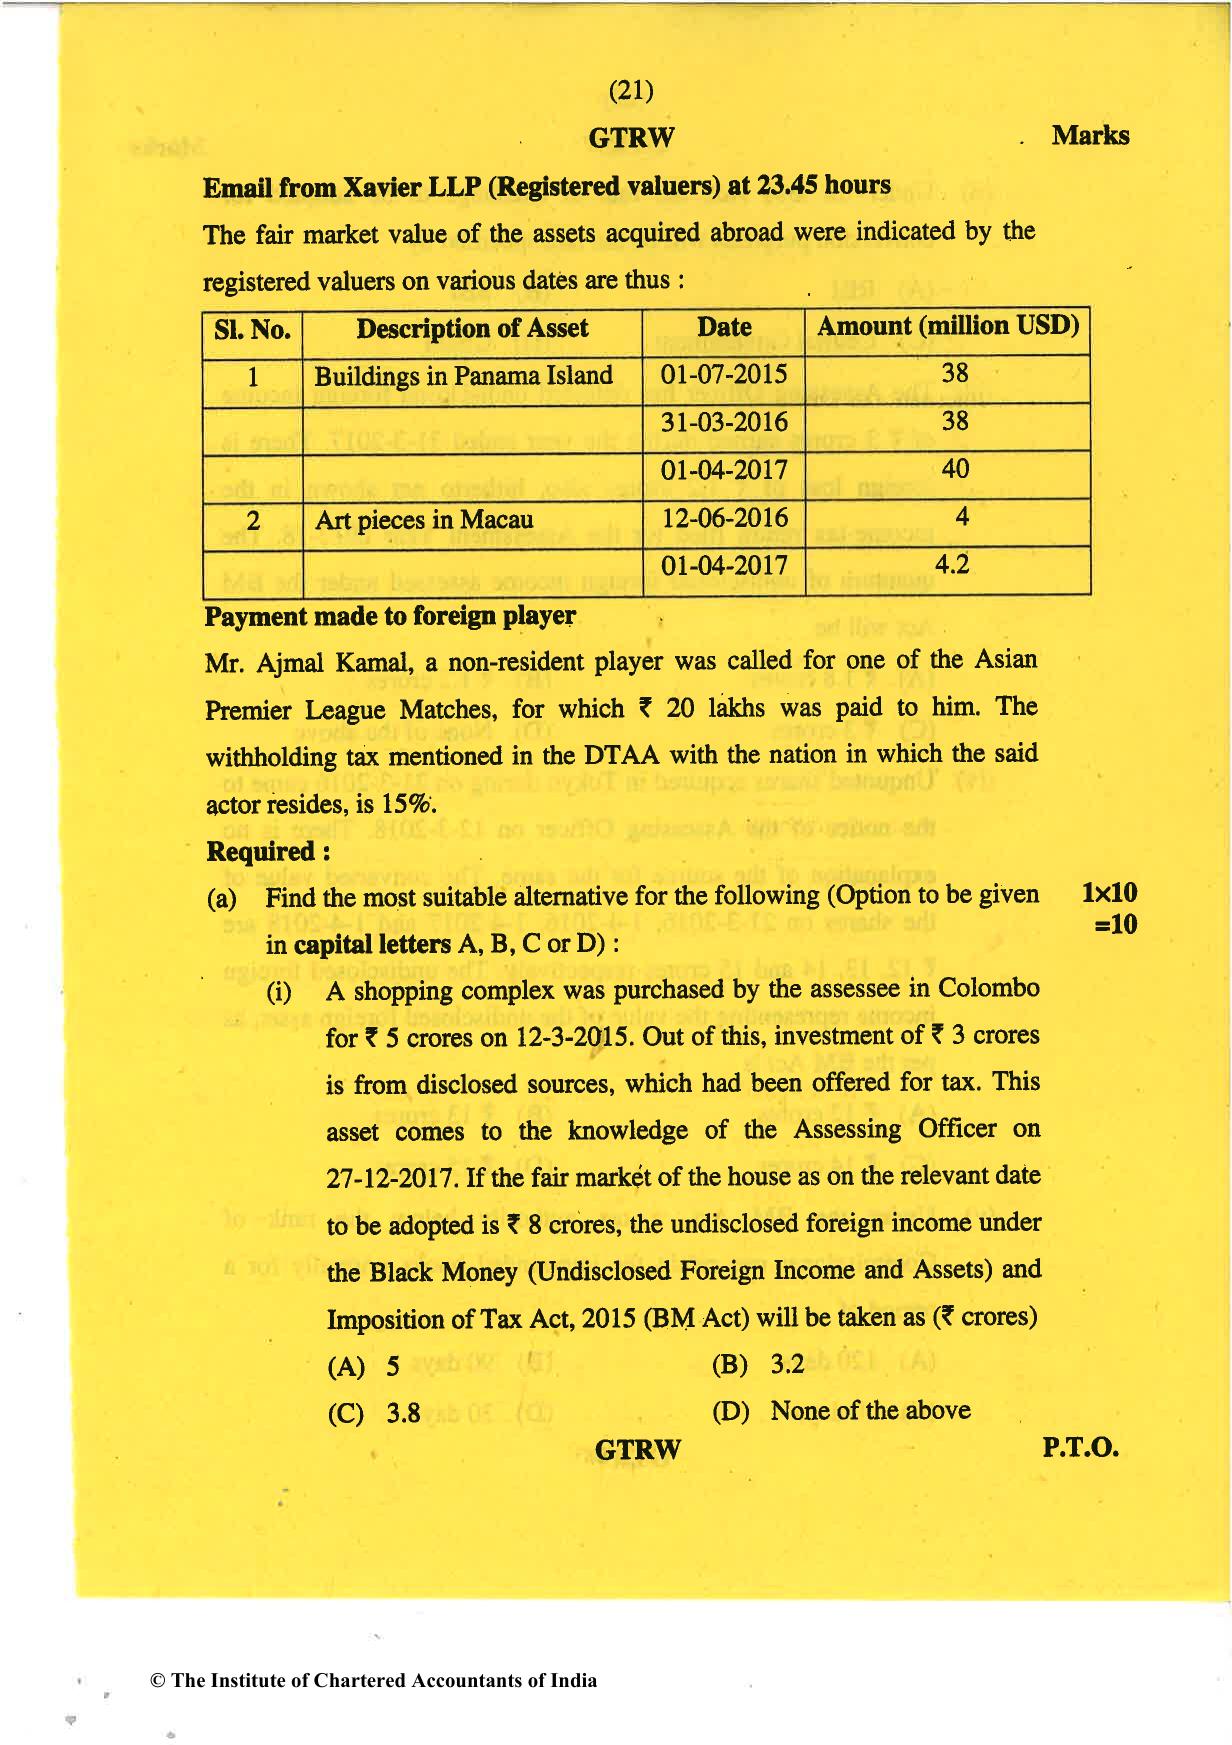 CA Final May 2018 Question Paper - Paper 6C – International Taxation - Page 21